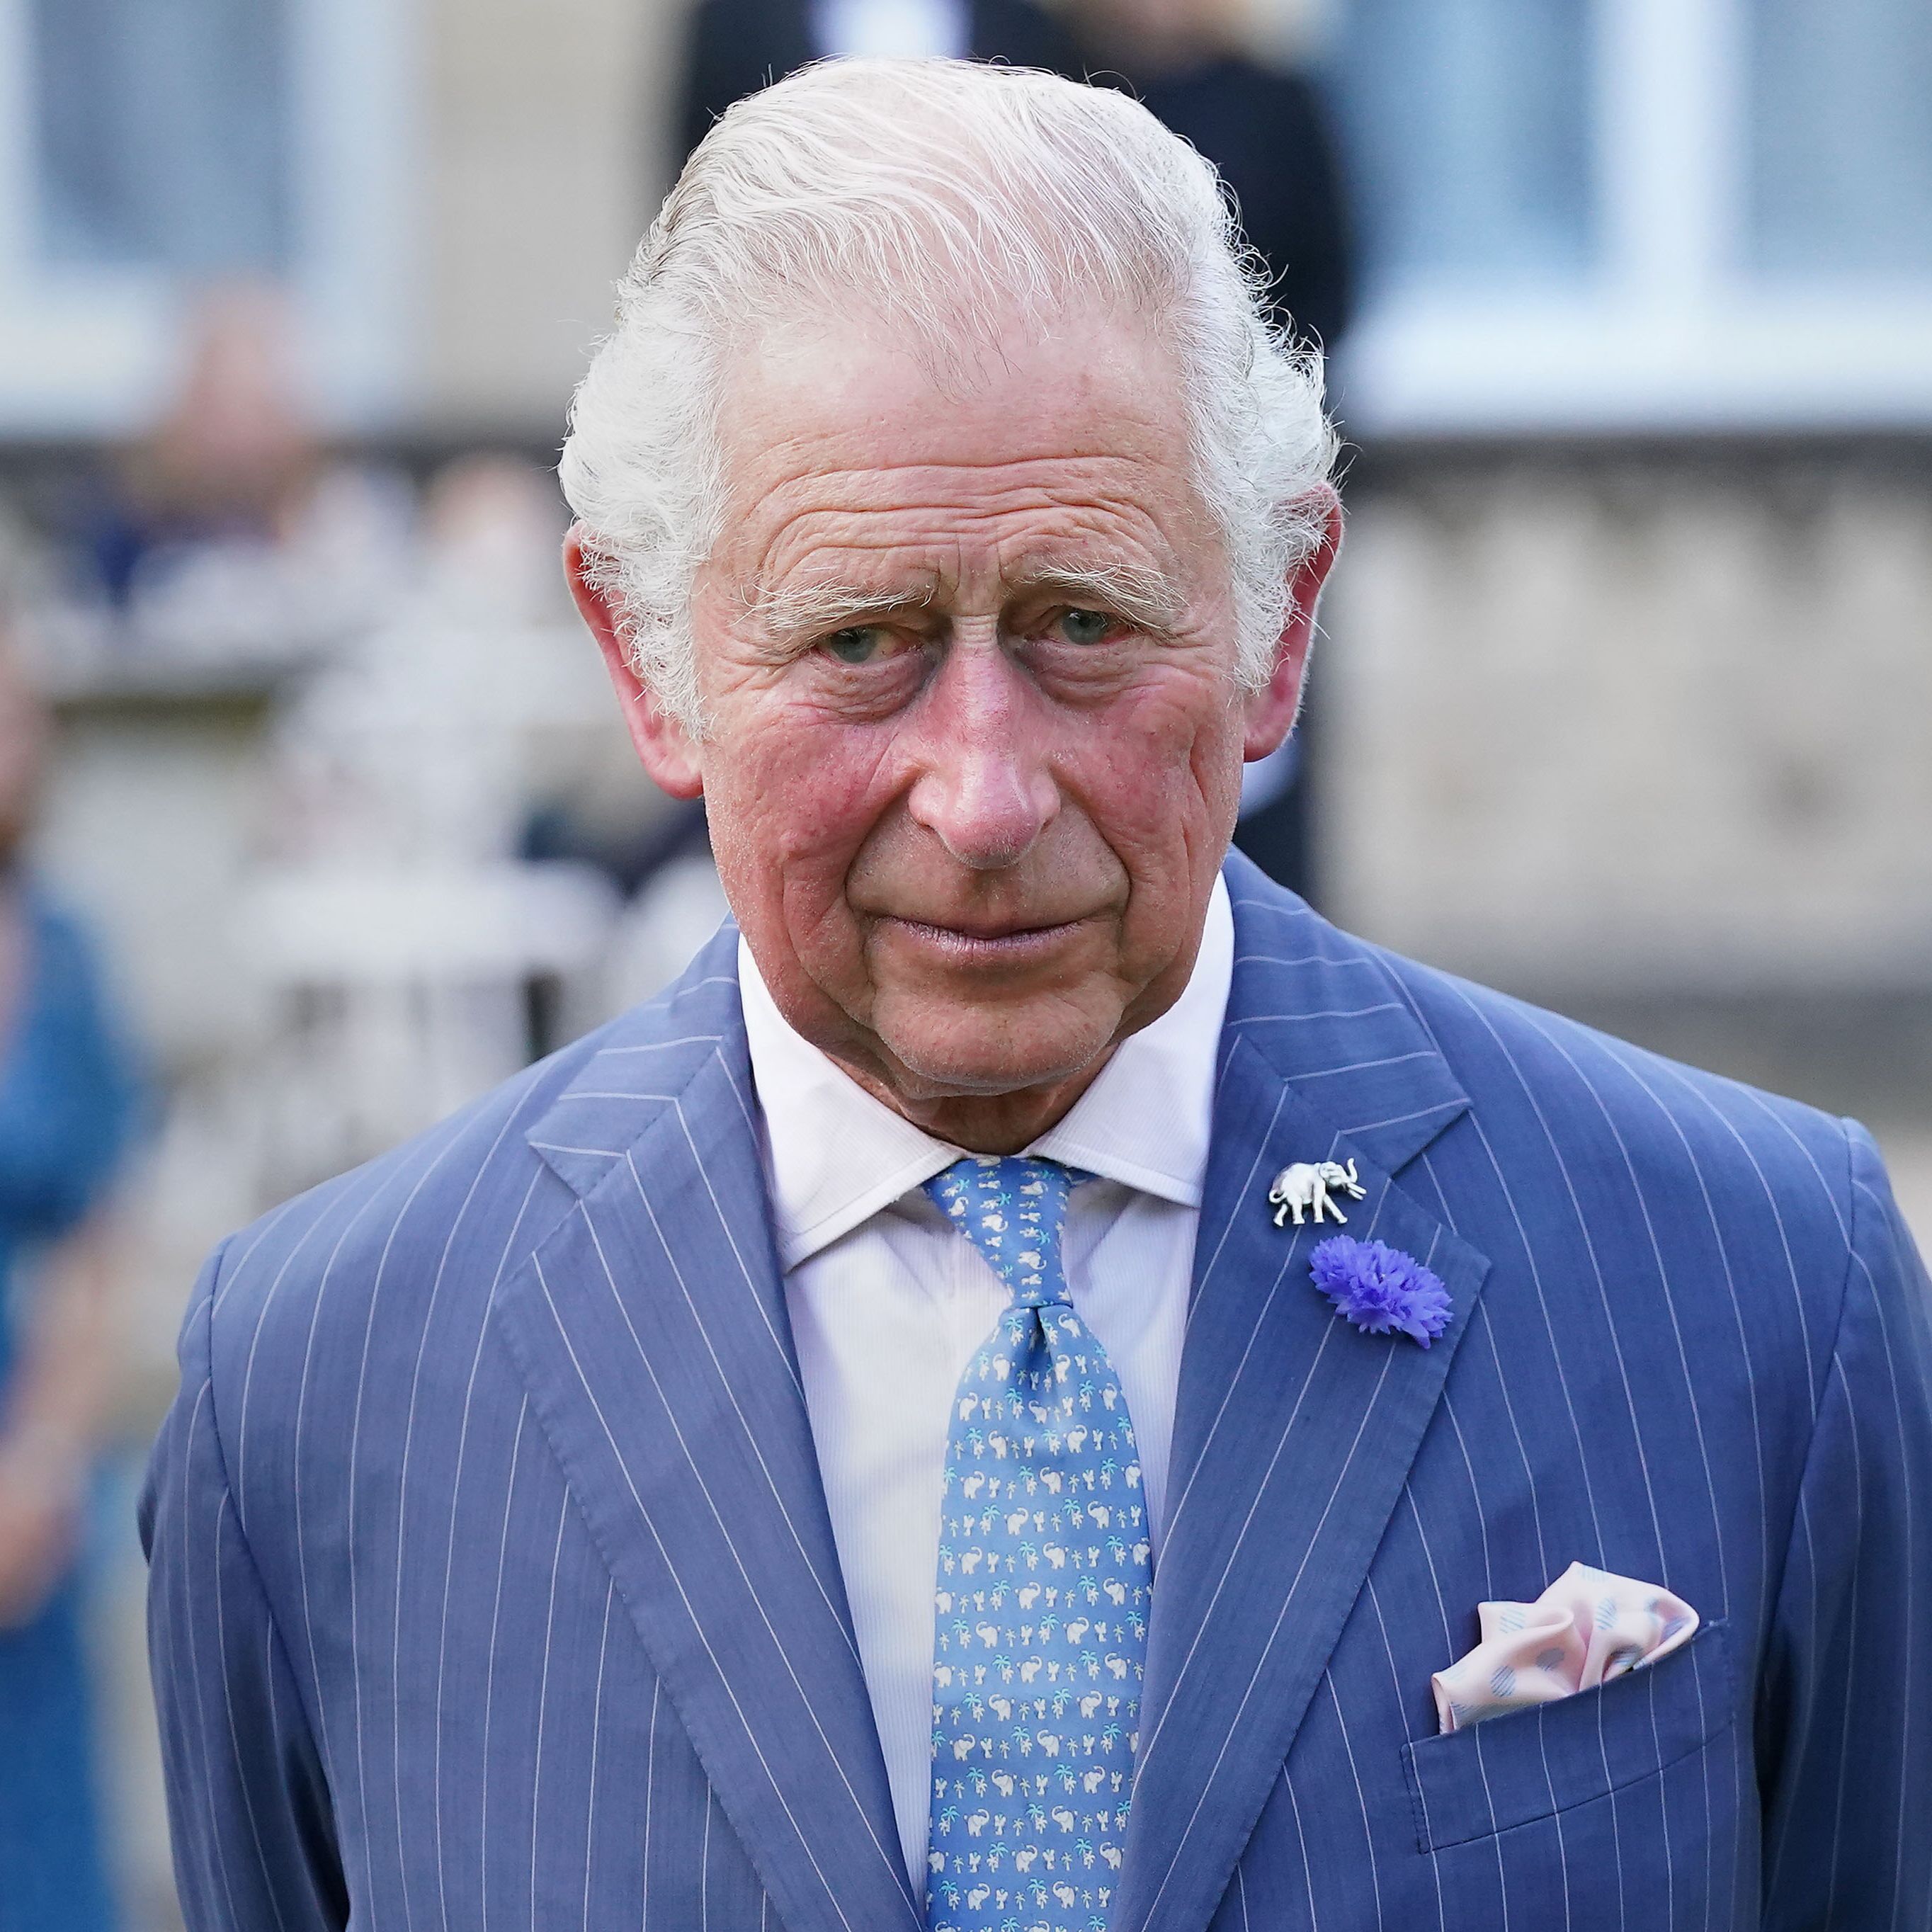 King Charles to Undergo Surgery as Kate Middleton Remains in Hospital